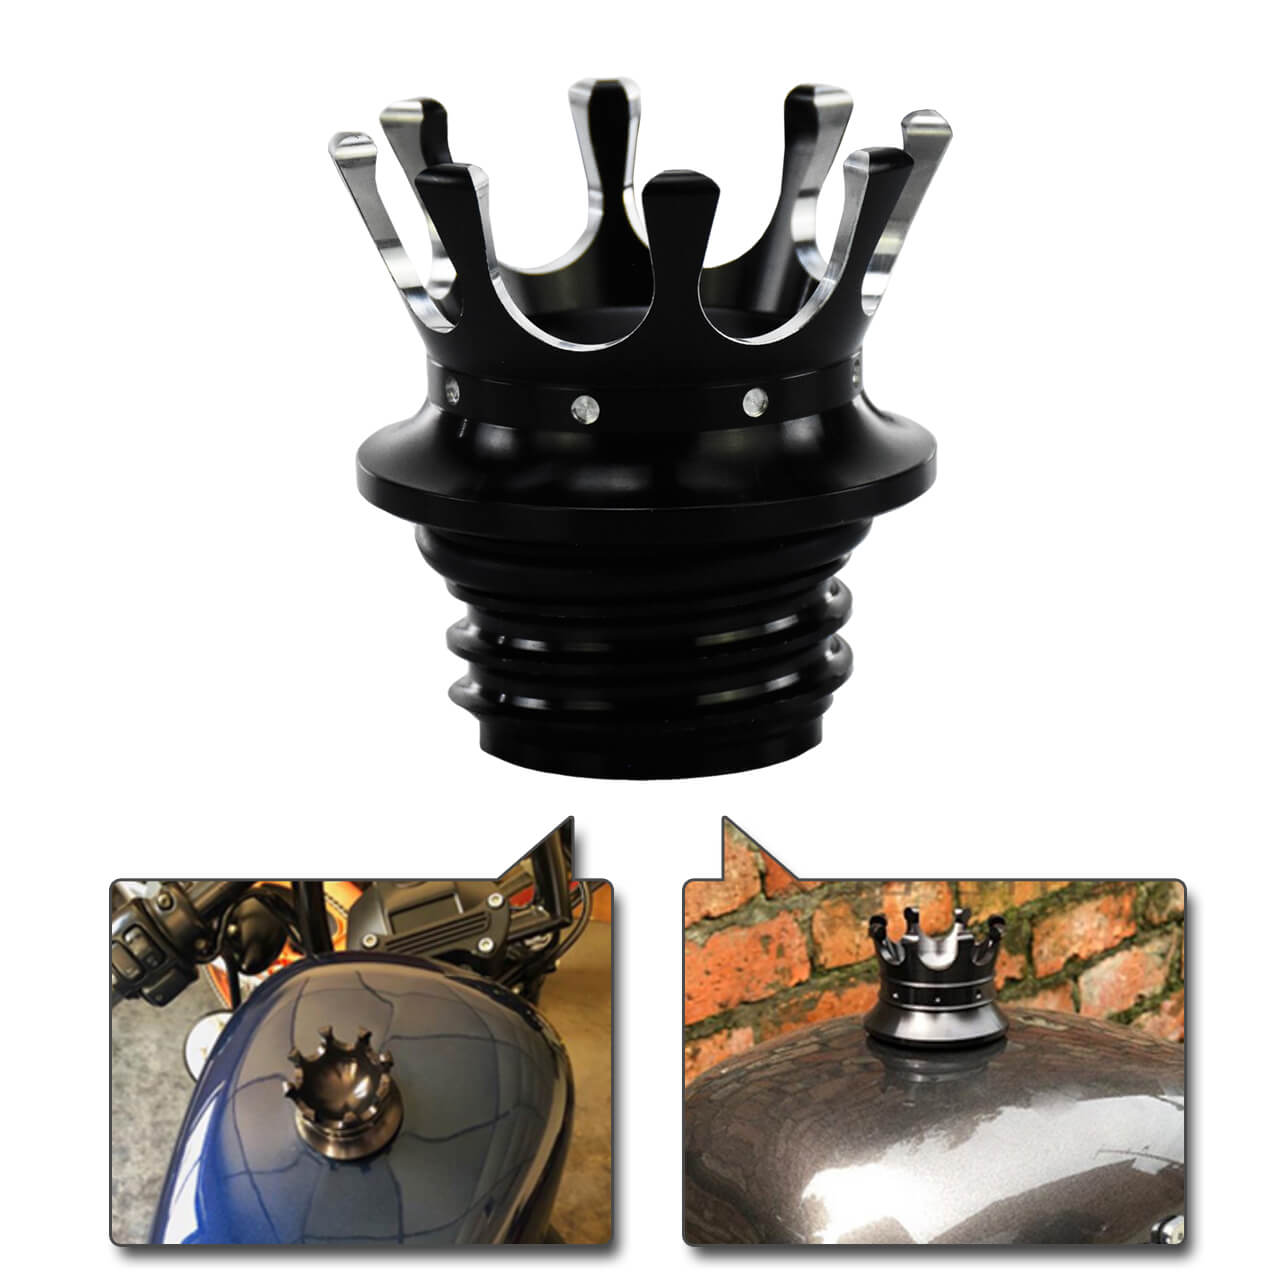 King Crown Gas Cap Fuel Tank Right-hand Thread Billet Aluminum Fit For Harley | Mactions